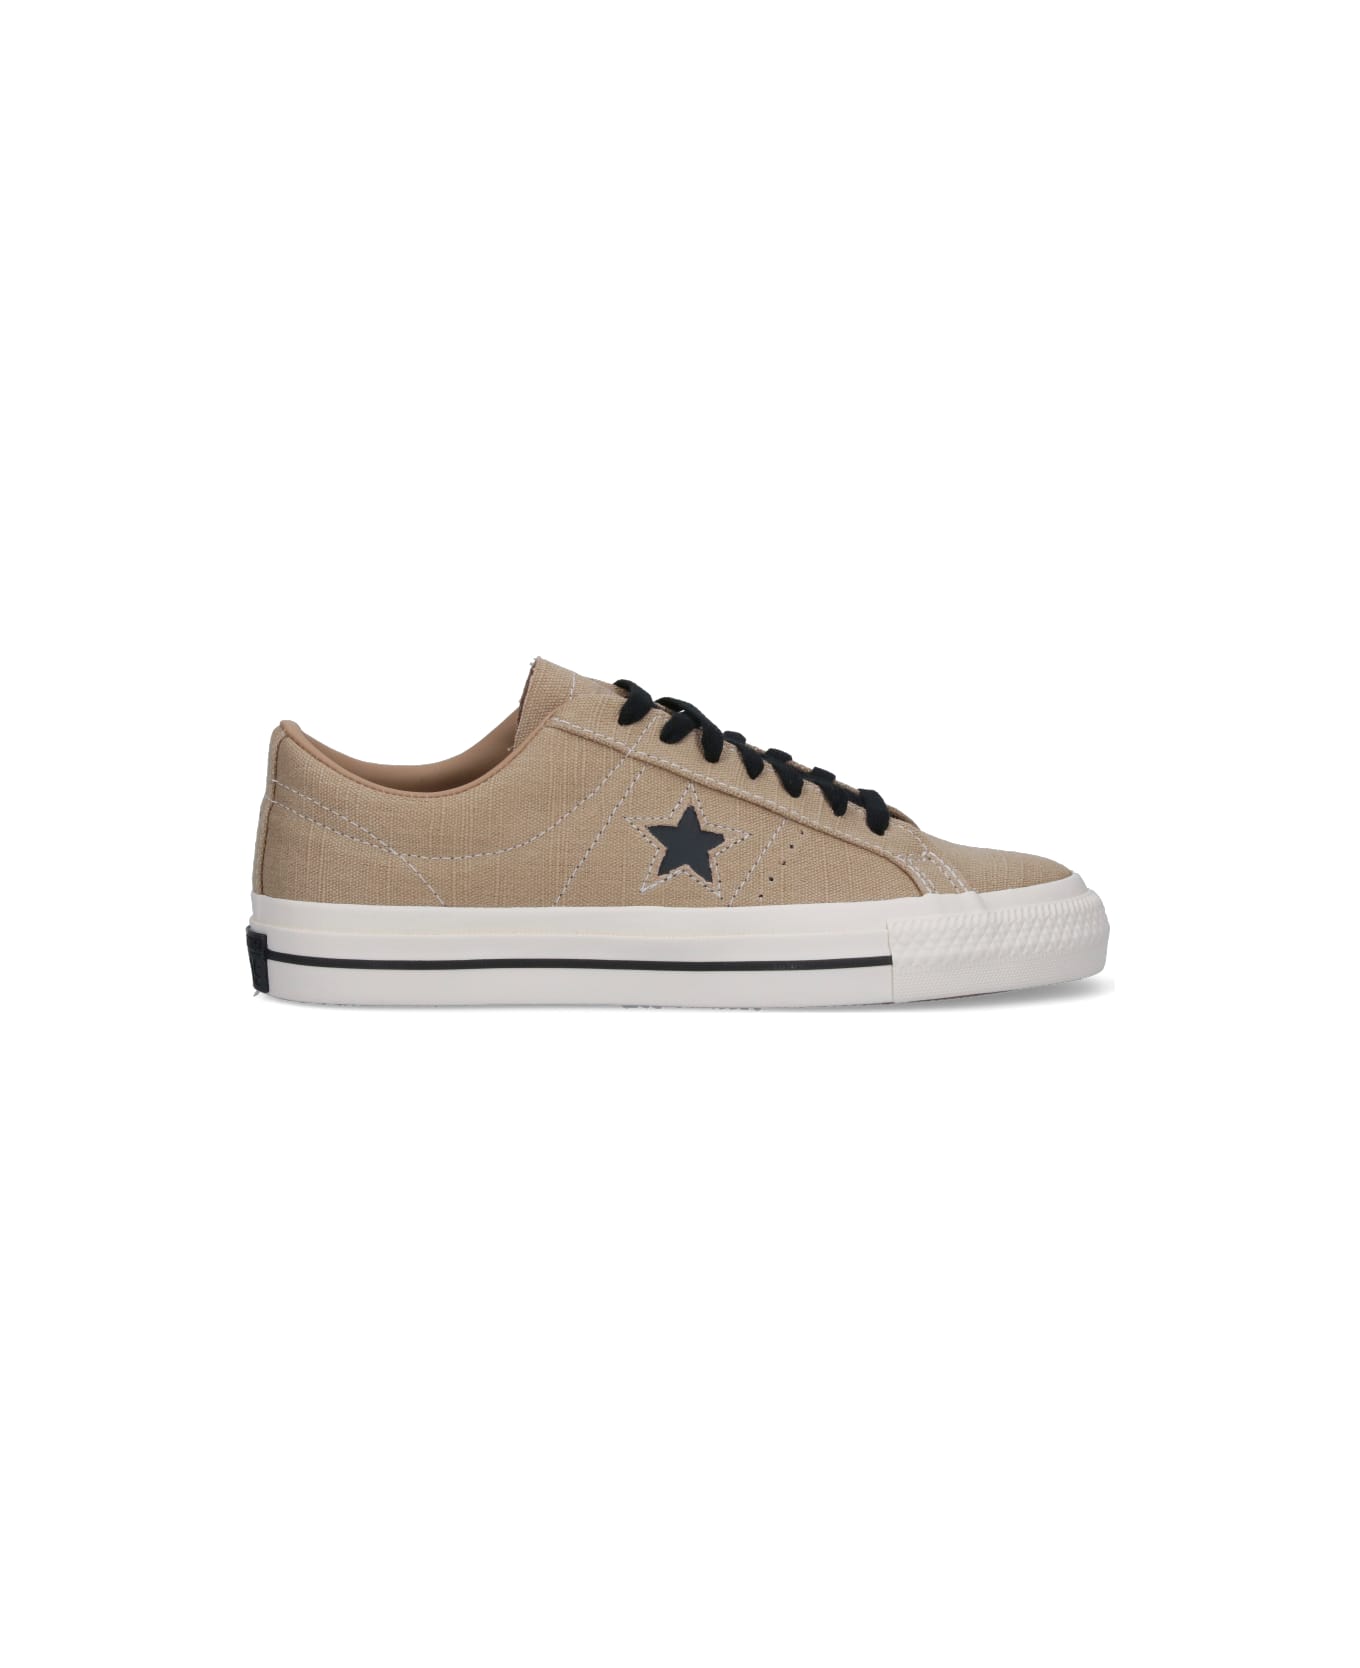 Converse "cons One Star Pro" Sneakers - Beige